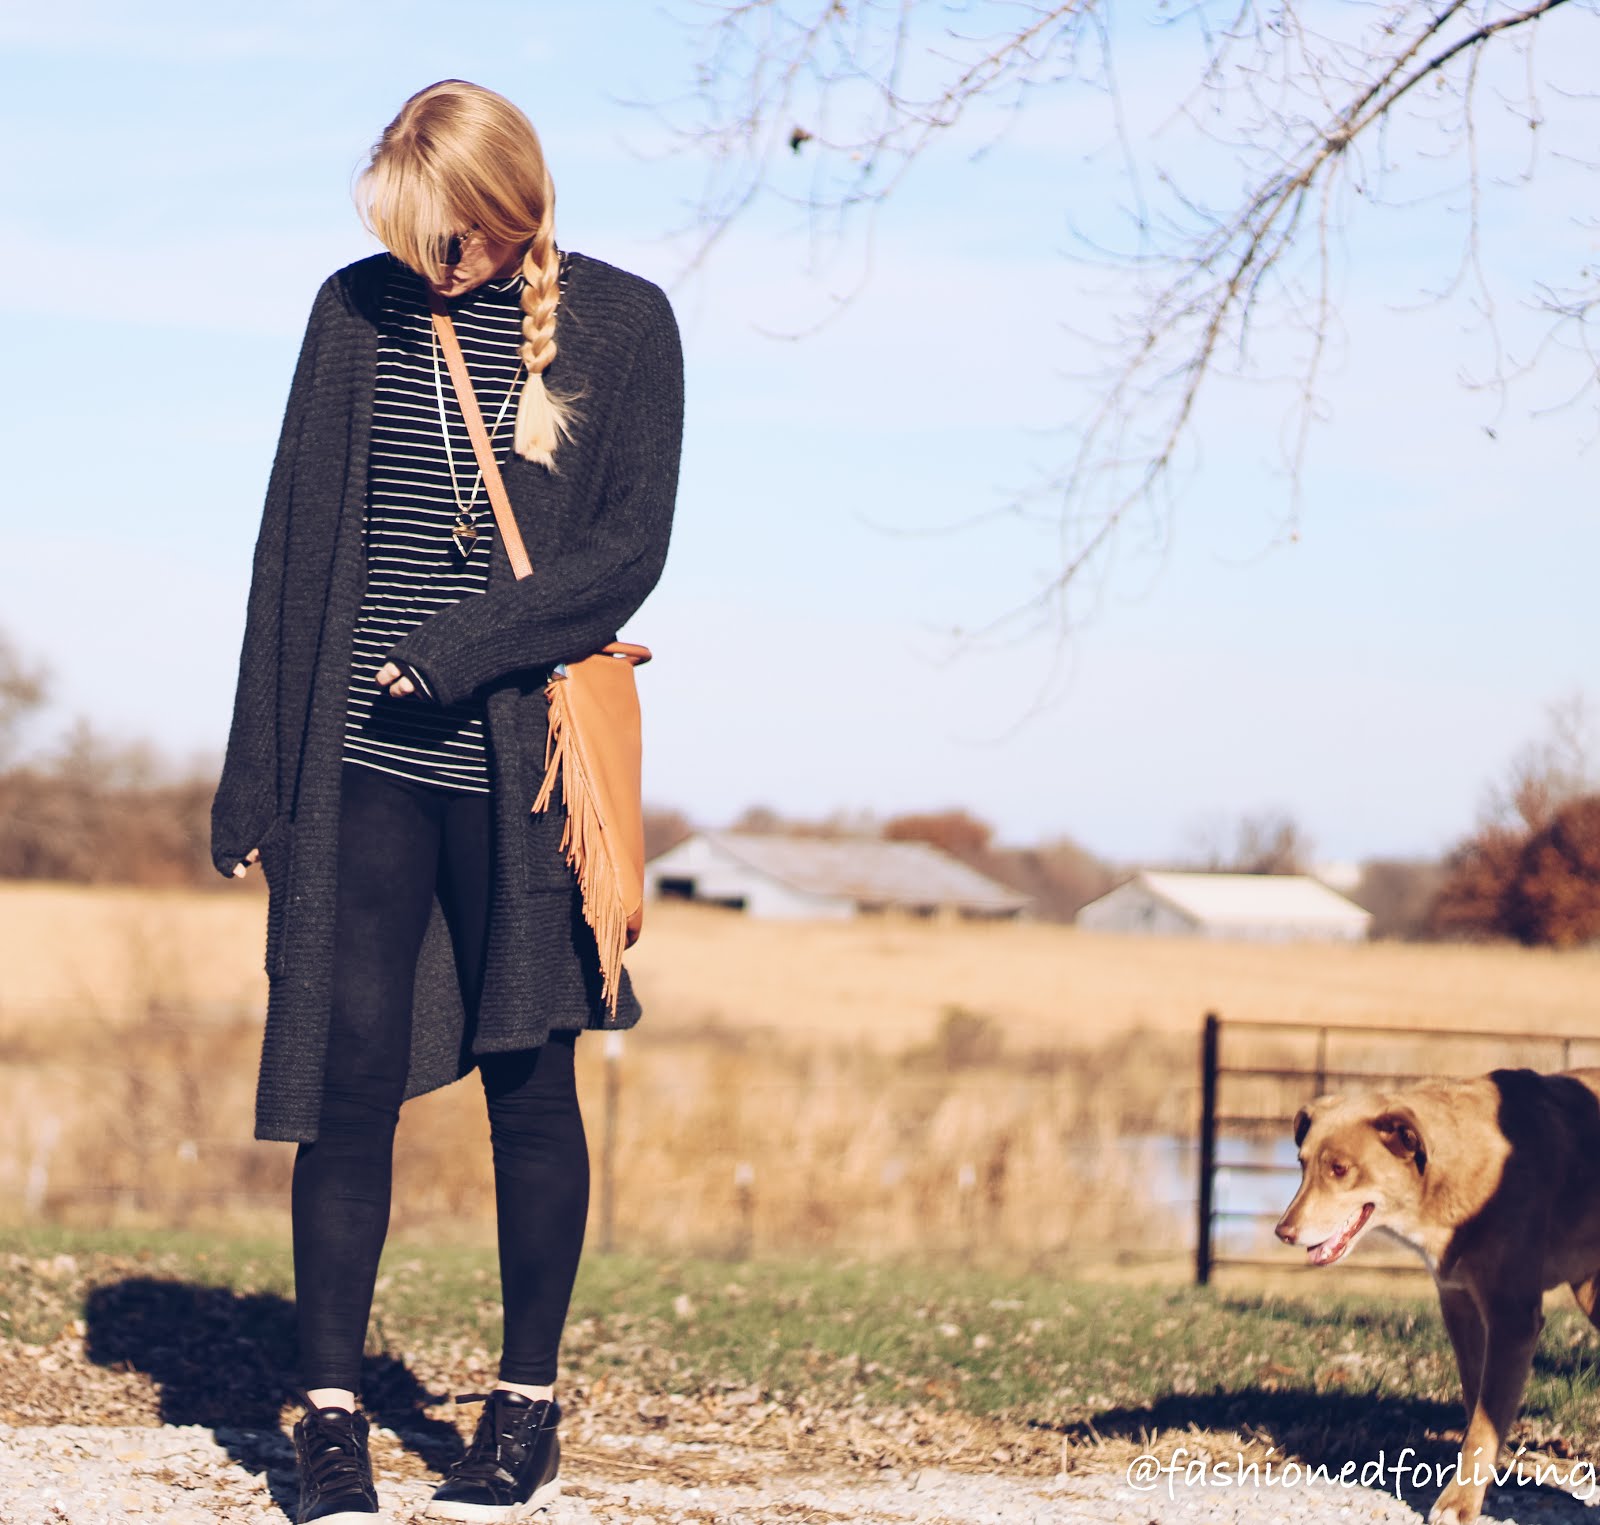 Fashioned For Living: long cardi coat outfit with suede leggings and  striped turtleneck